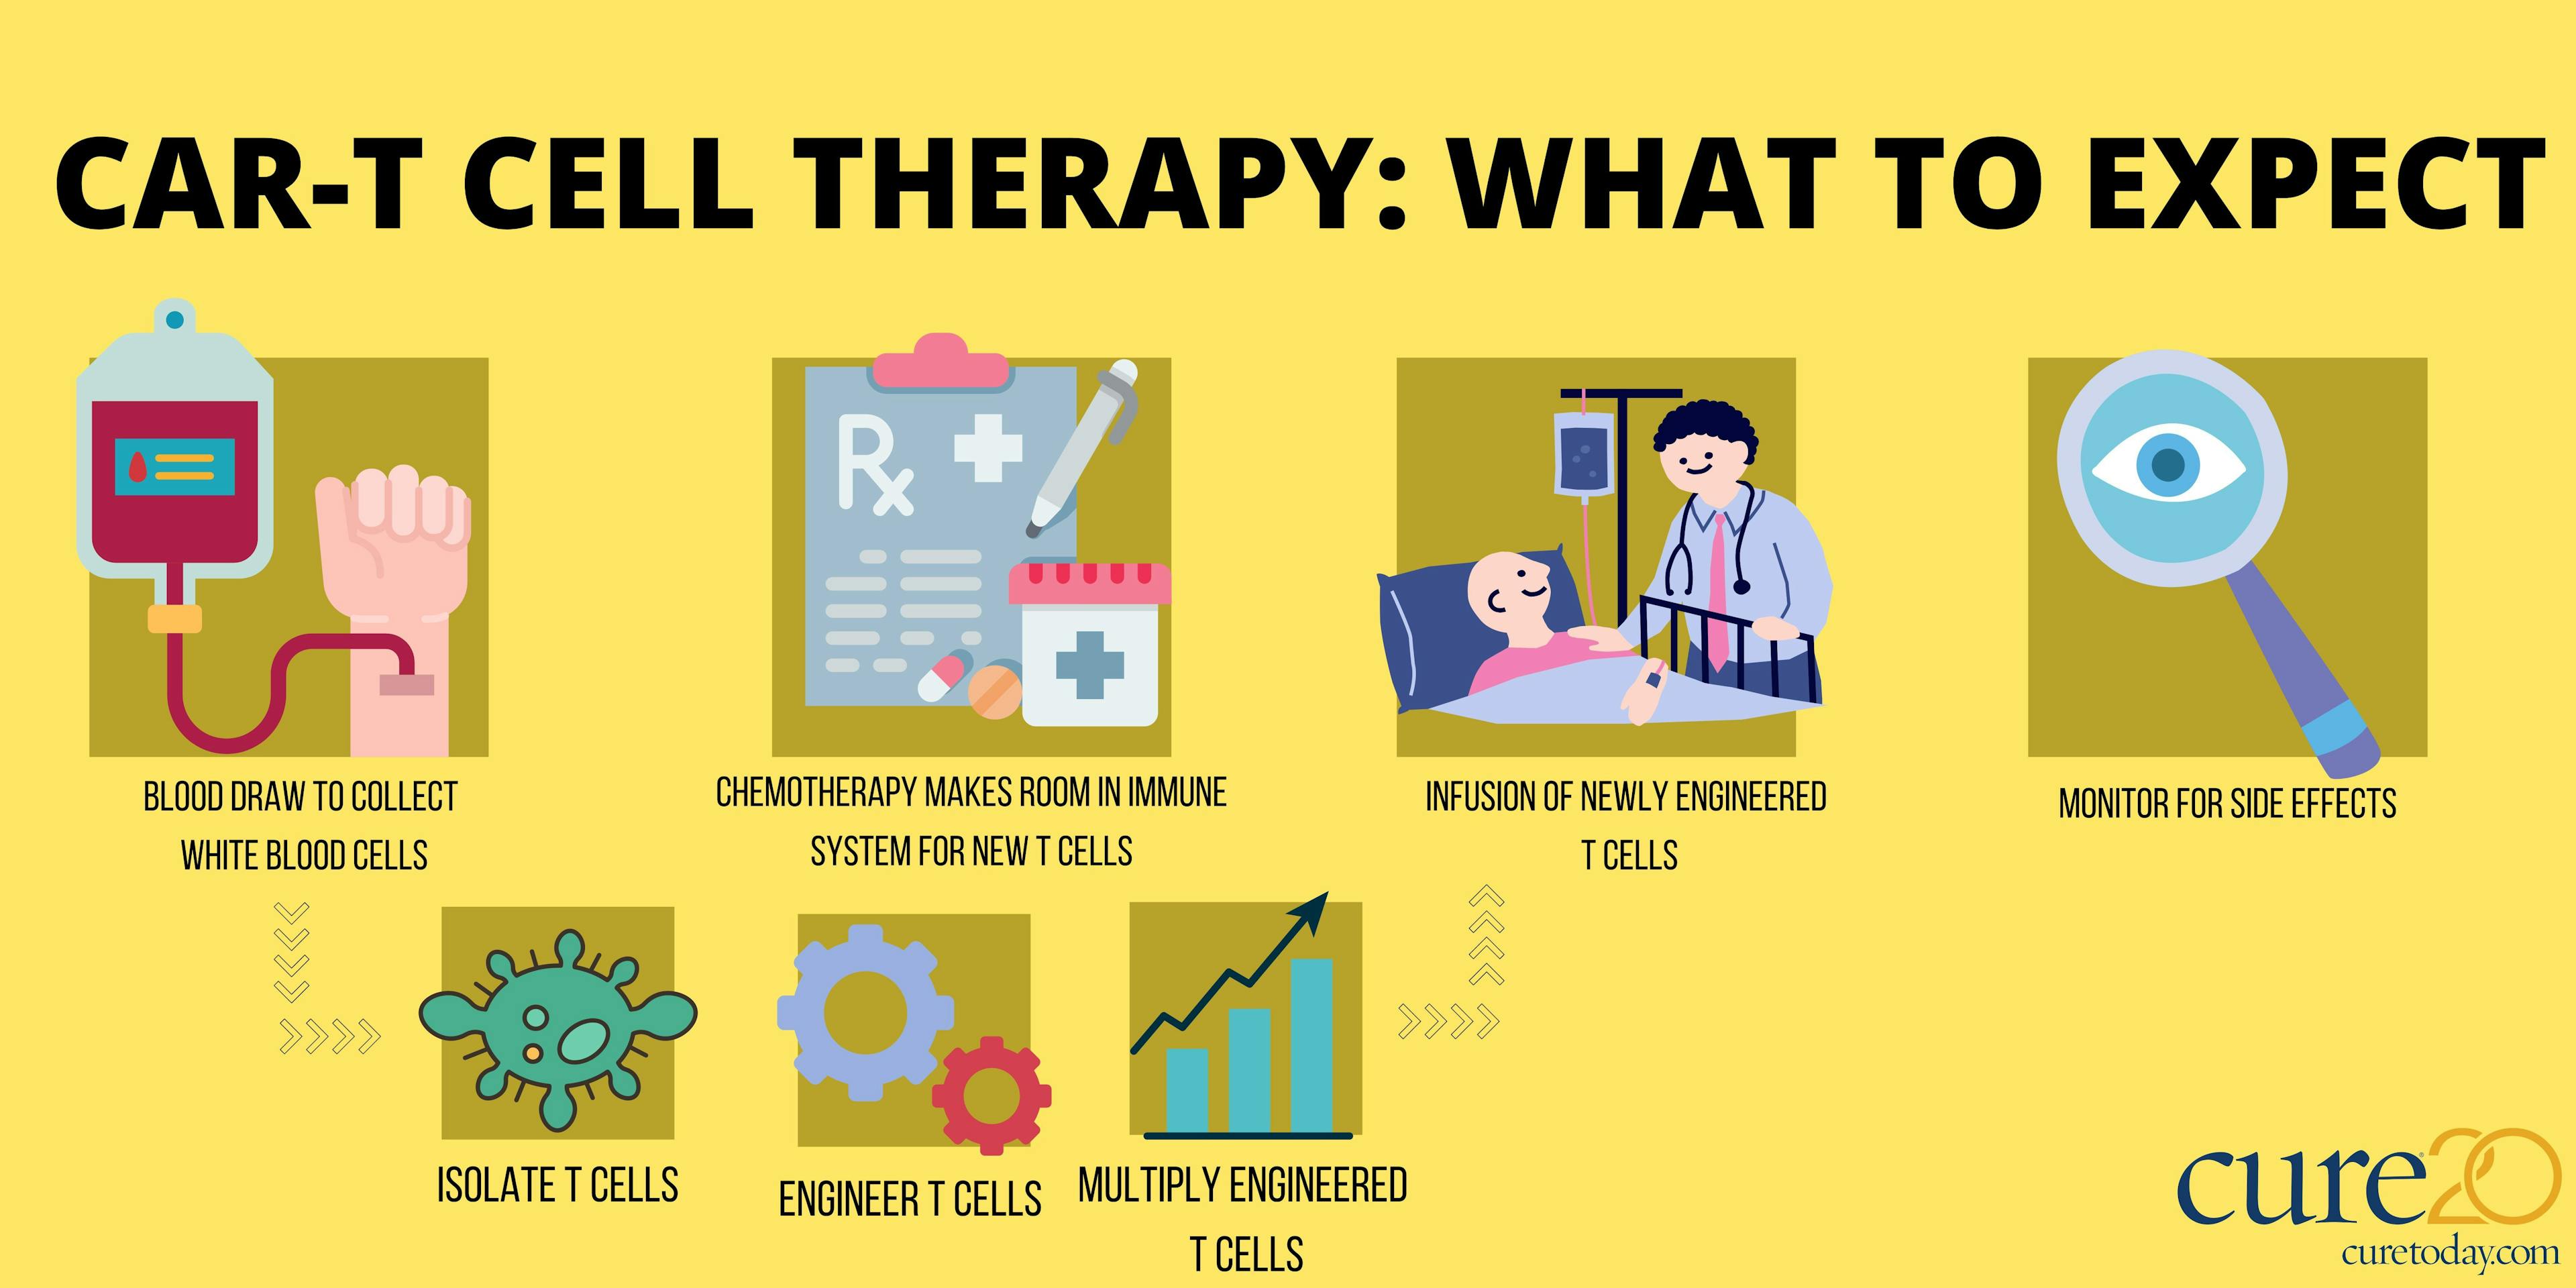 infographic explaining what patients can expect while undergoing CAR-T cell thearpy